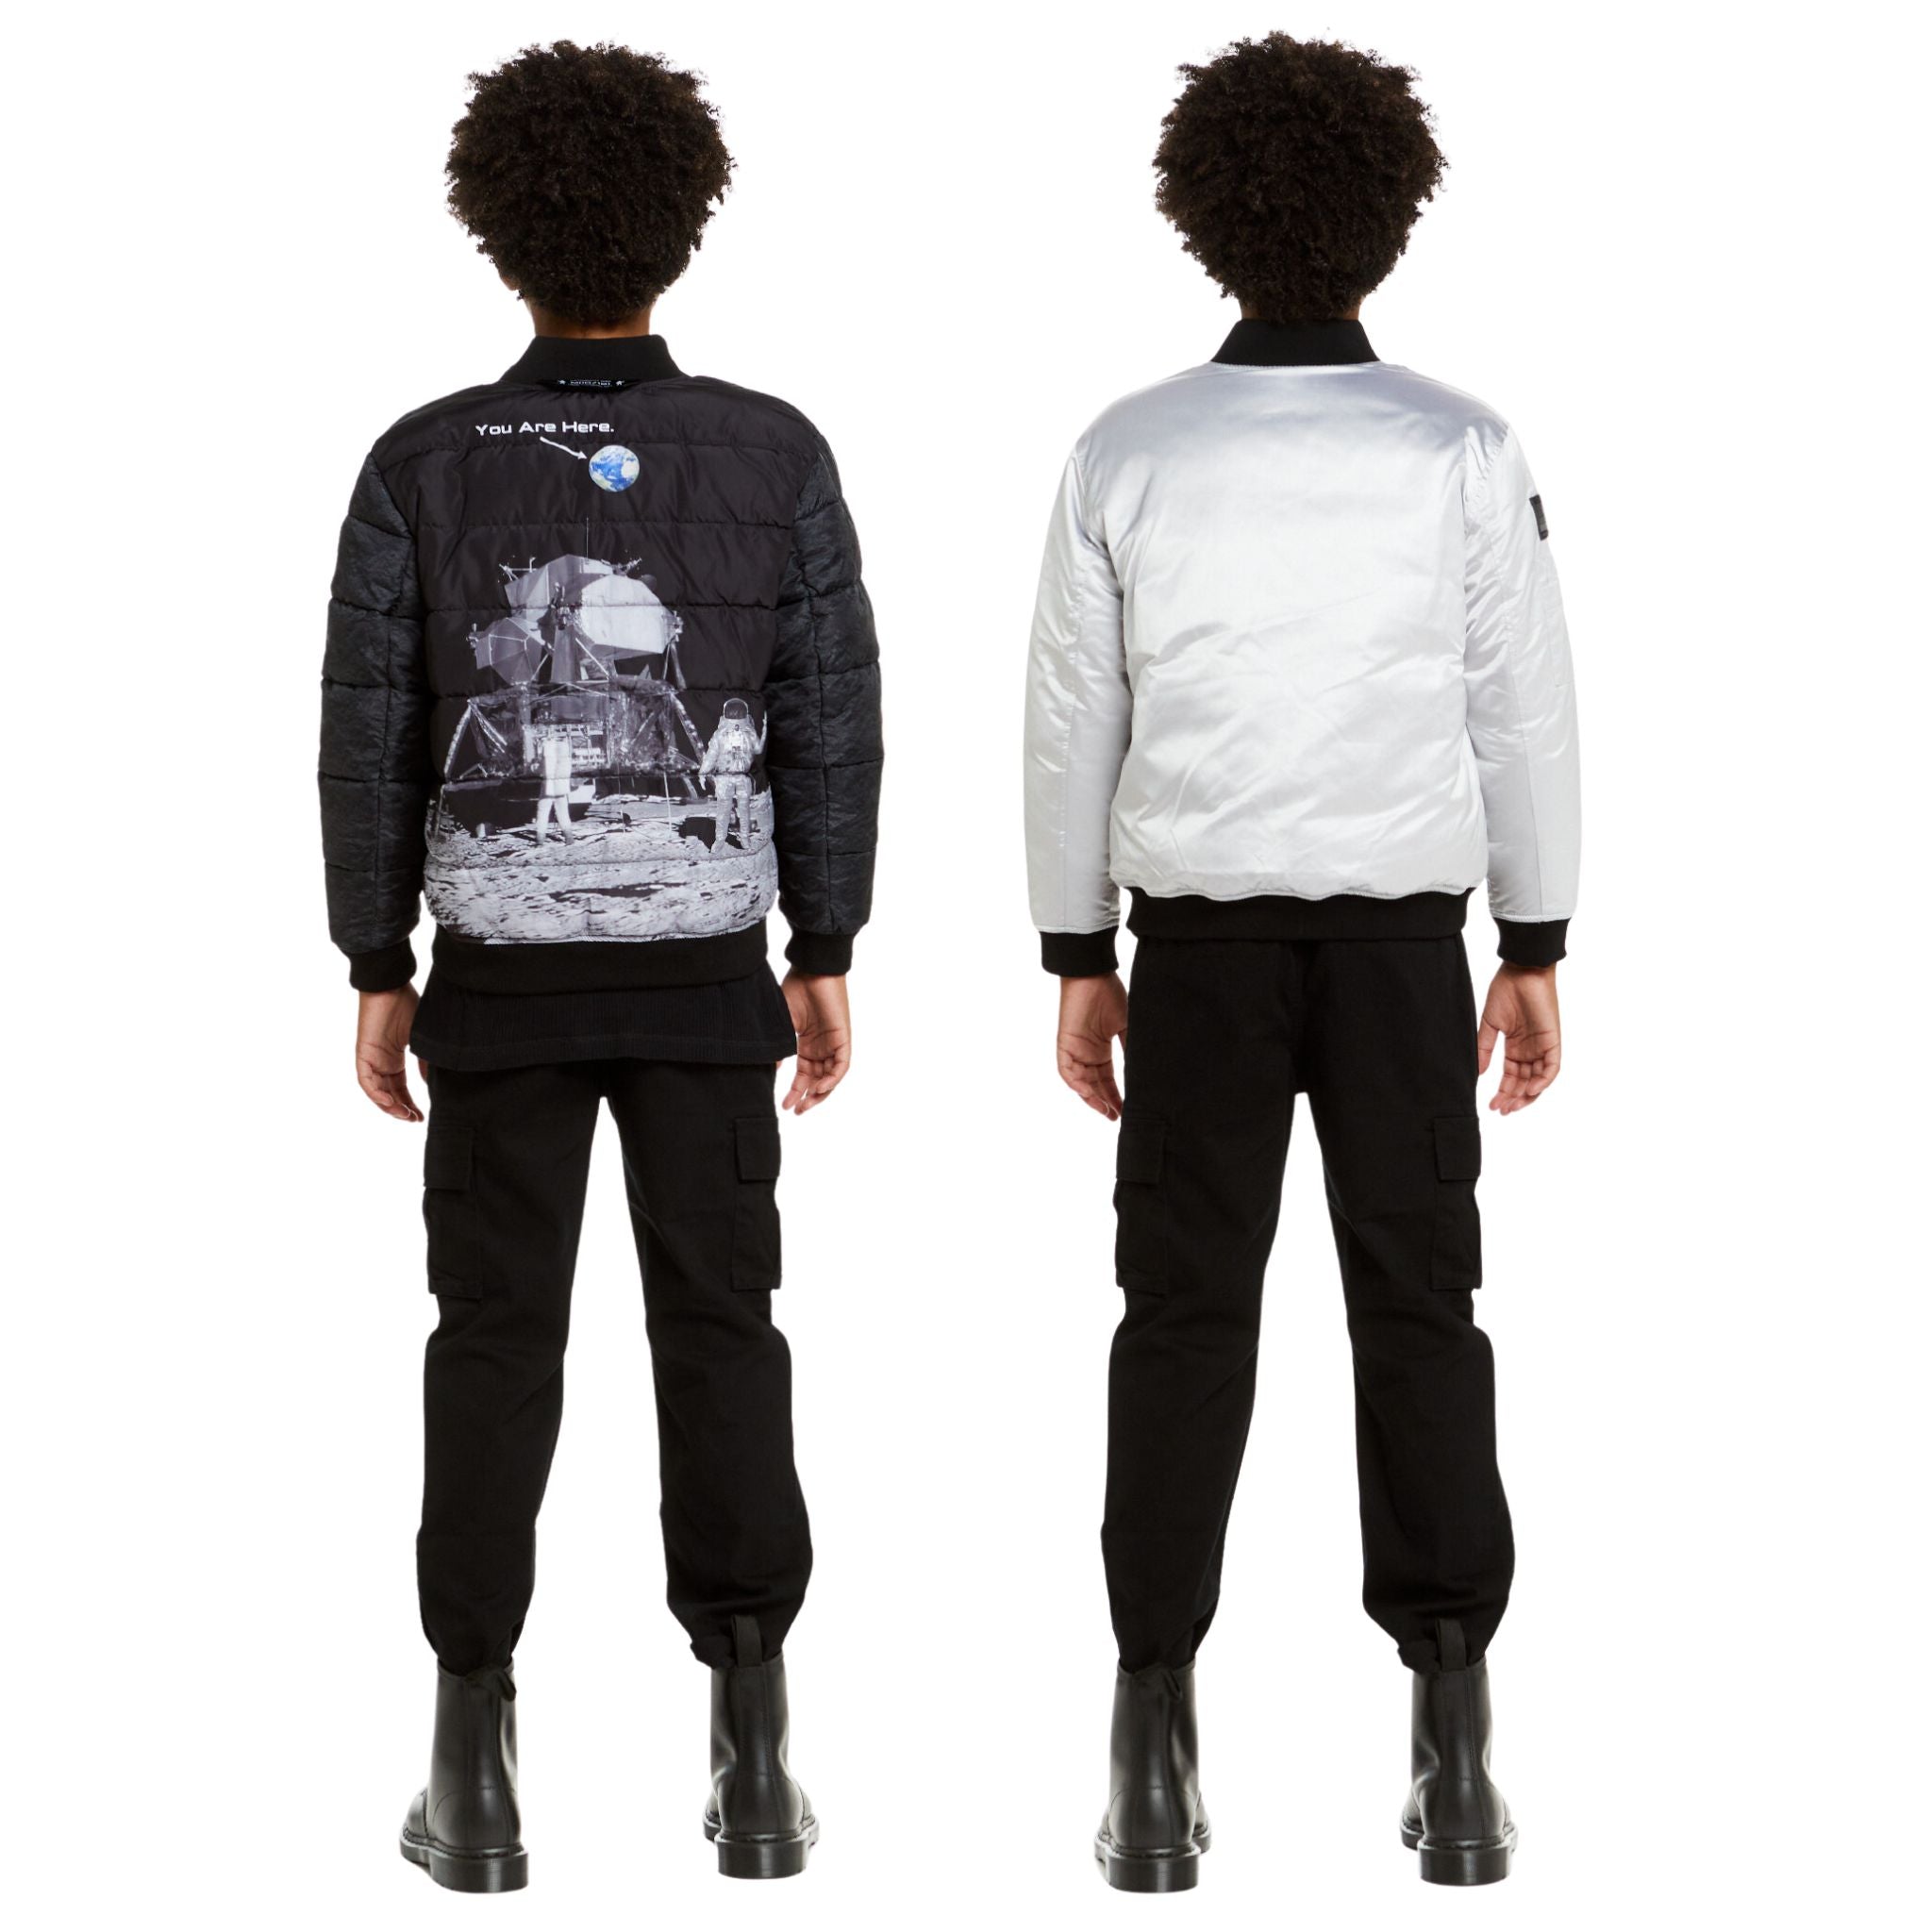 SPACEONE x Andy & Evan®| Reversible Bomber Jacket | Galaxy White